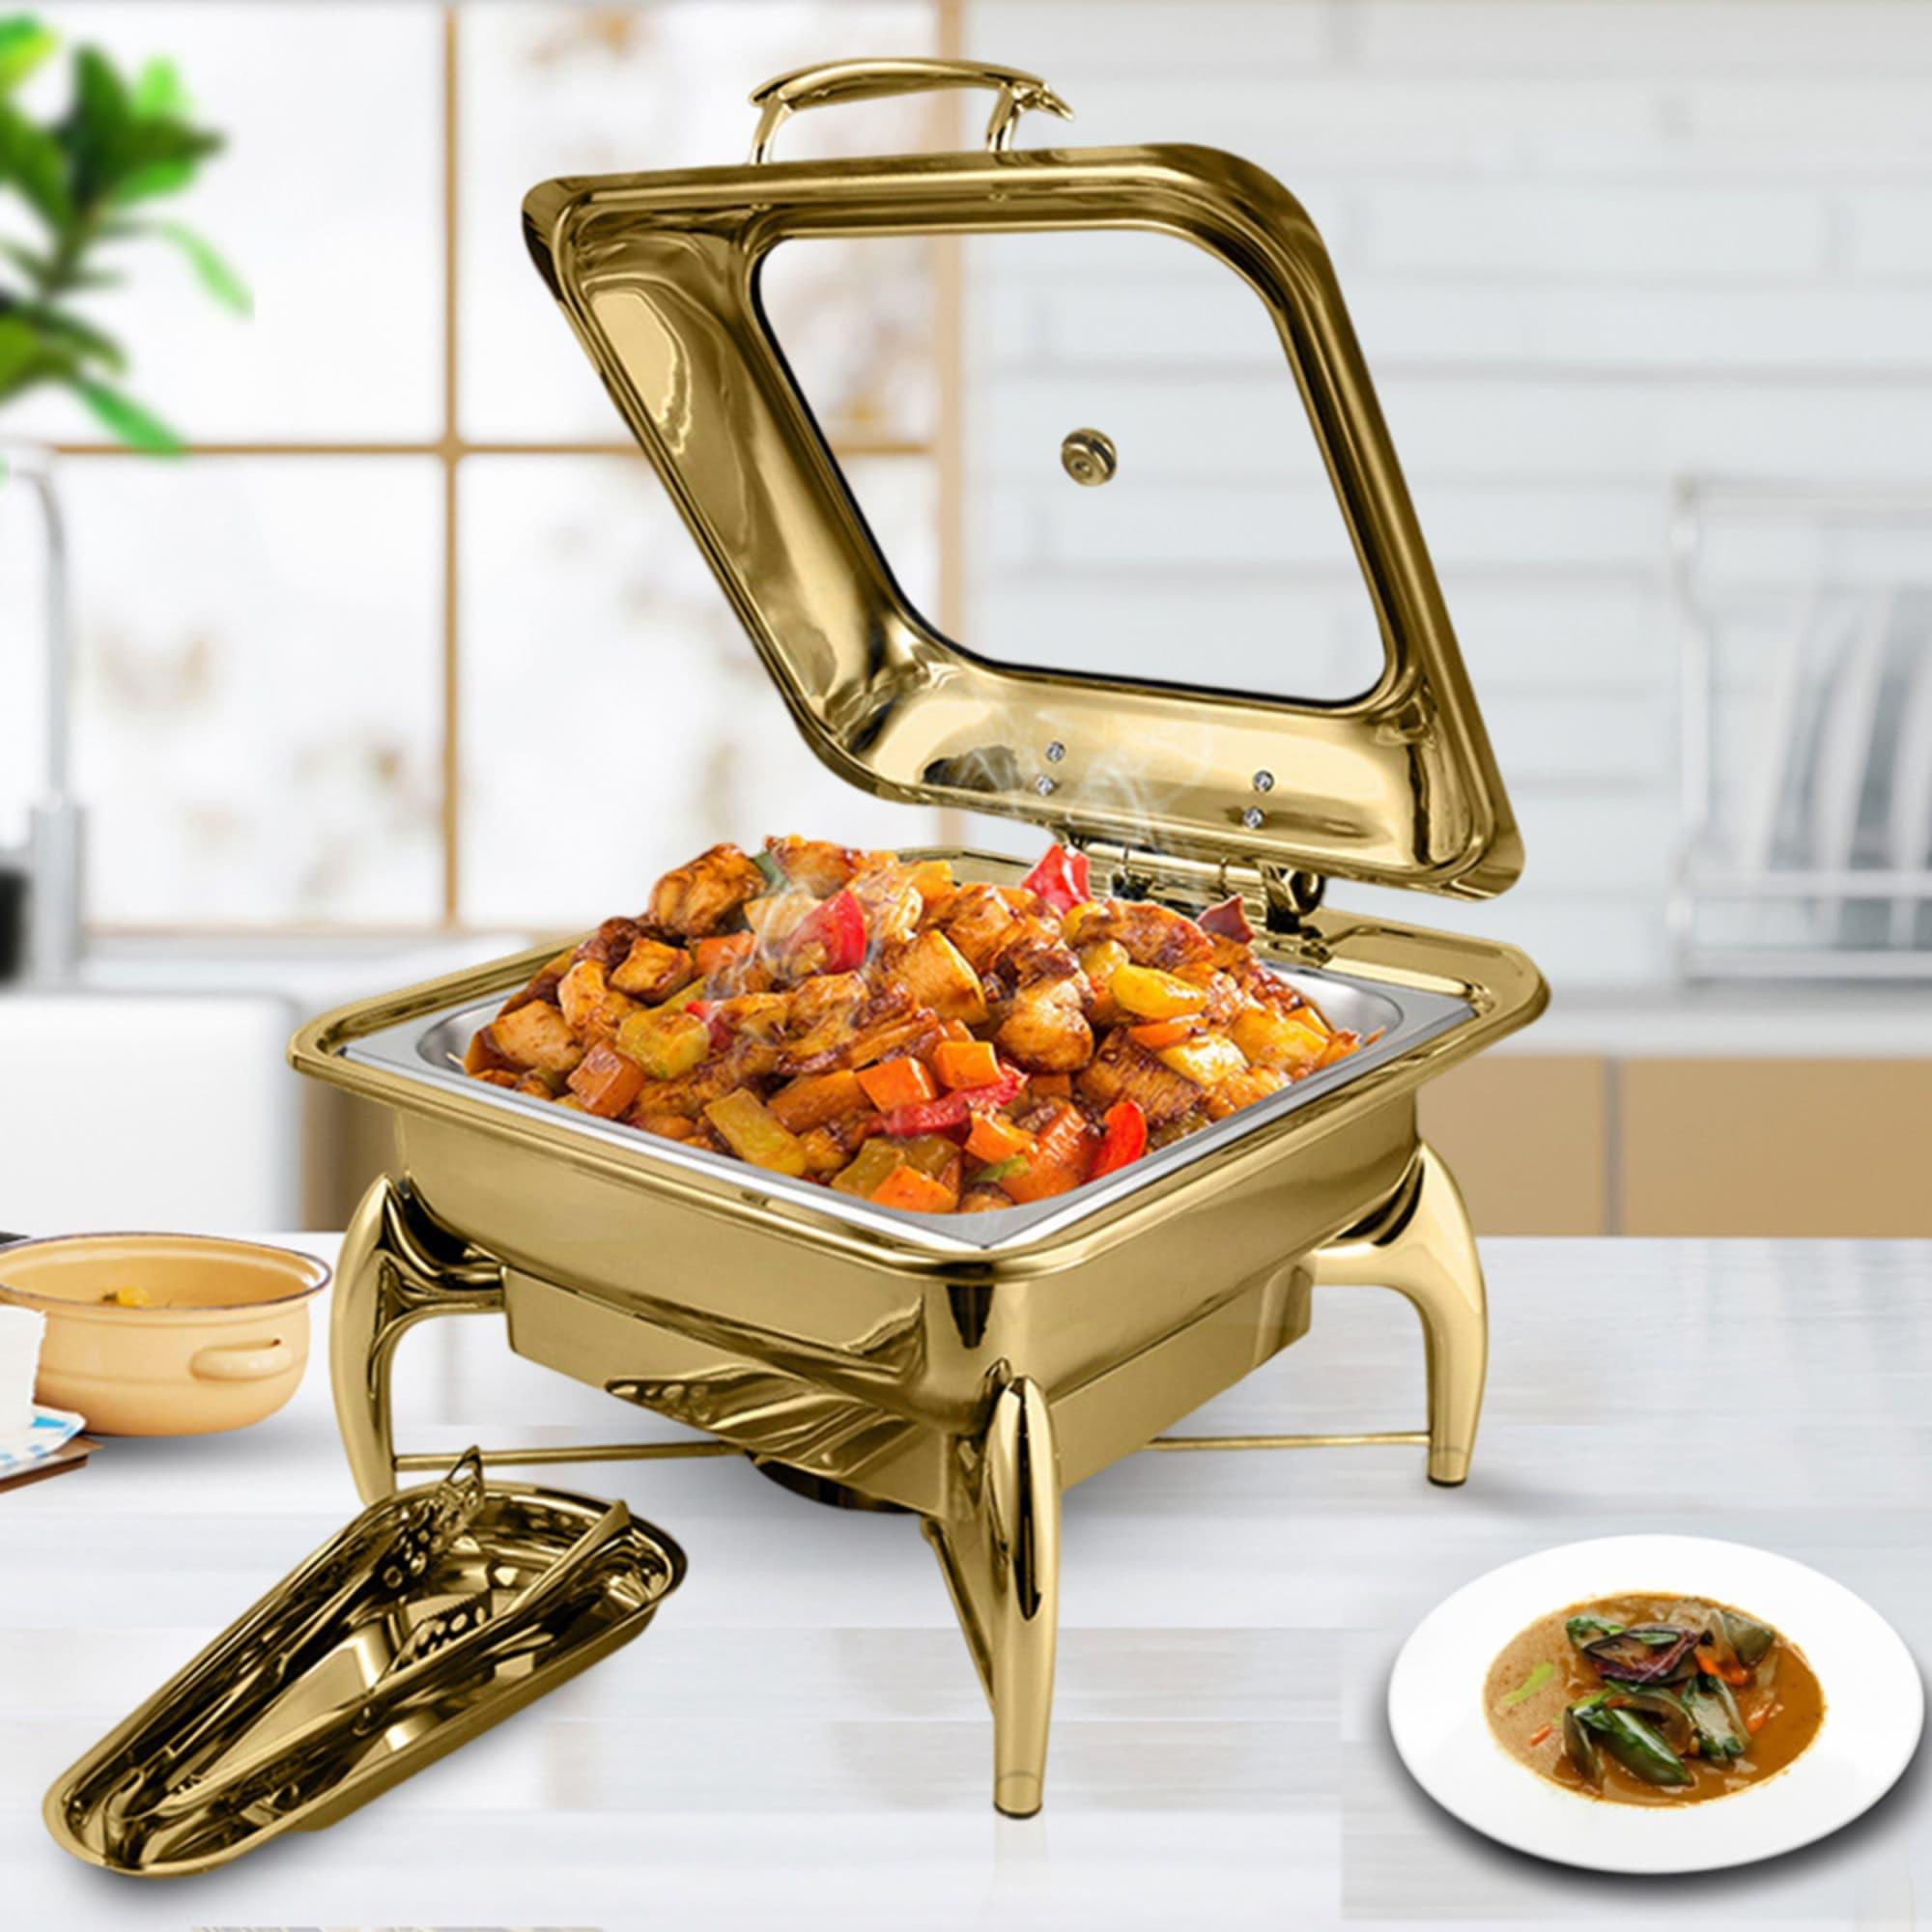 Soga Square Stainless Steel Chafing Dish with Top Lid Set of 2 Gold Image 3